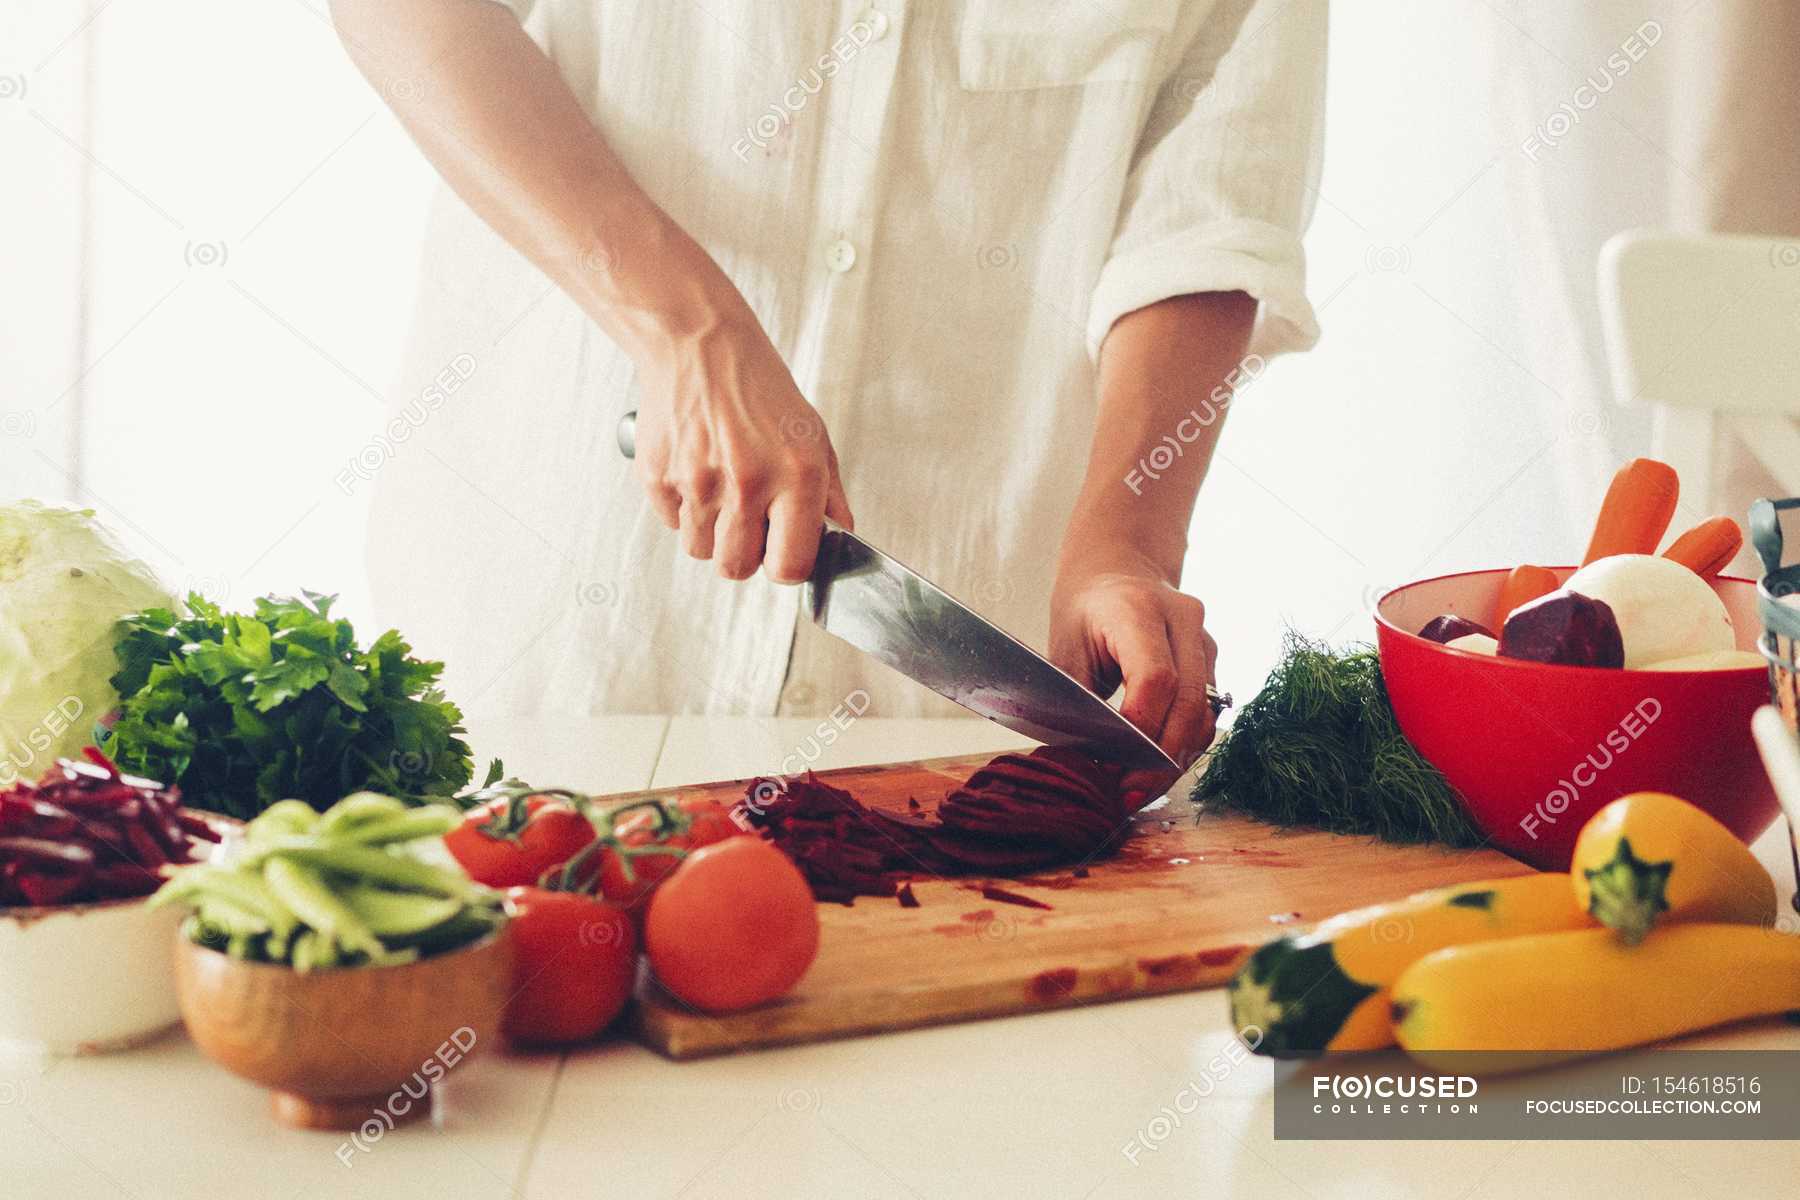 https://st.focusedcollection.com/11312302/i/1800/focused_154618516-stock-photo-woman-chopping-vegetables-kitchen-knife.jpg